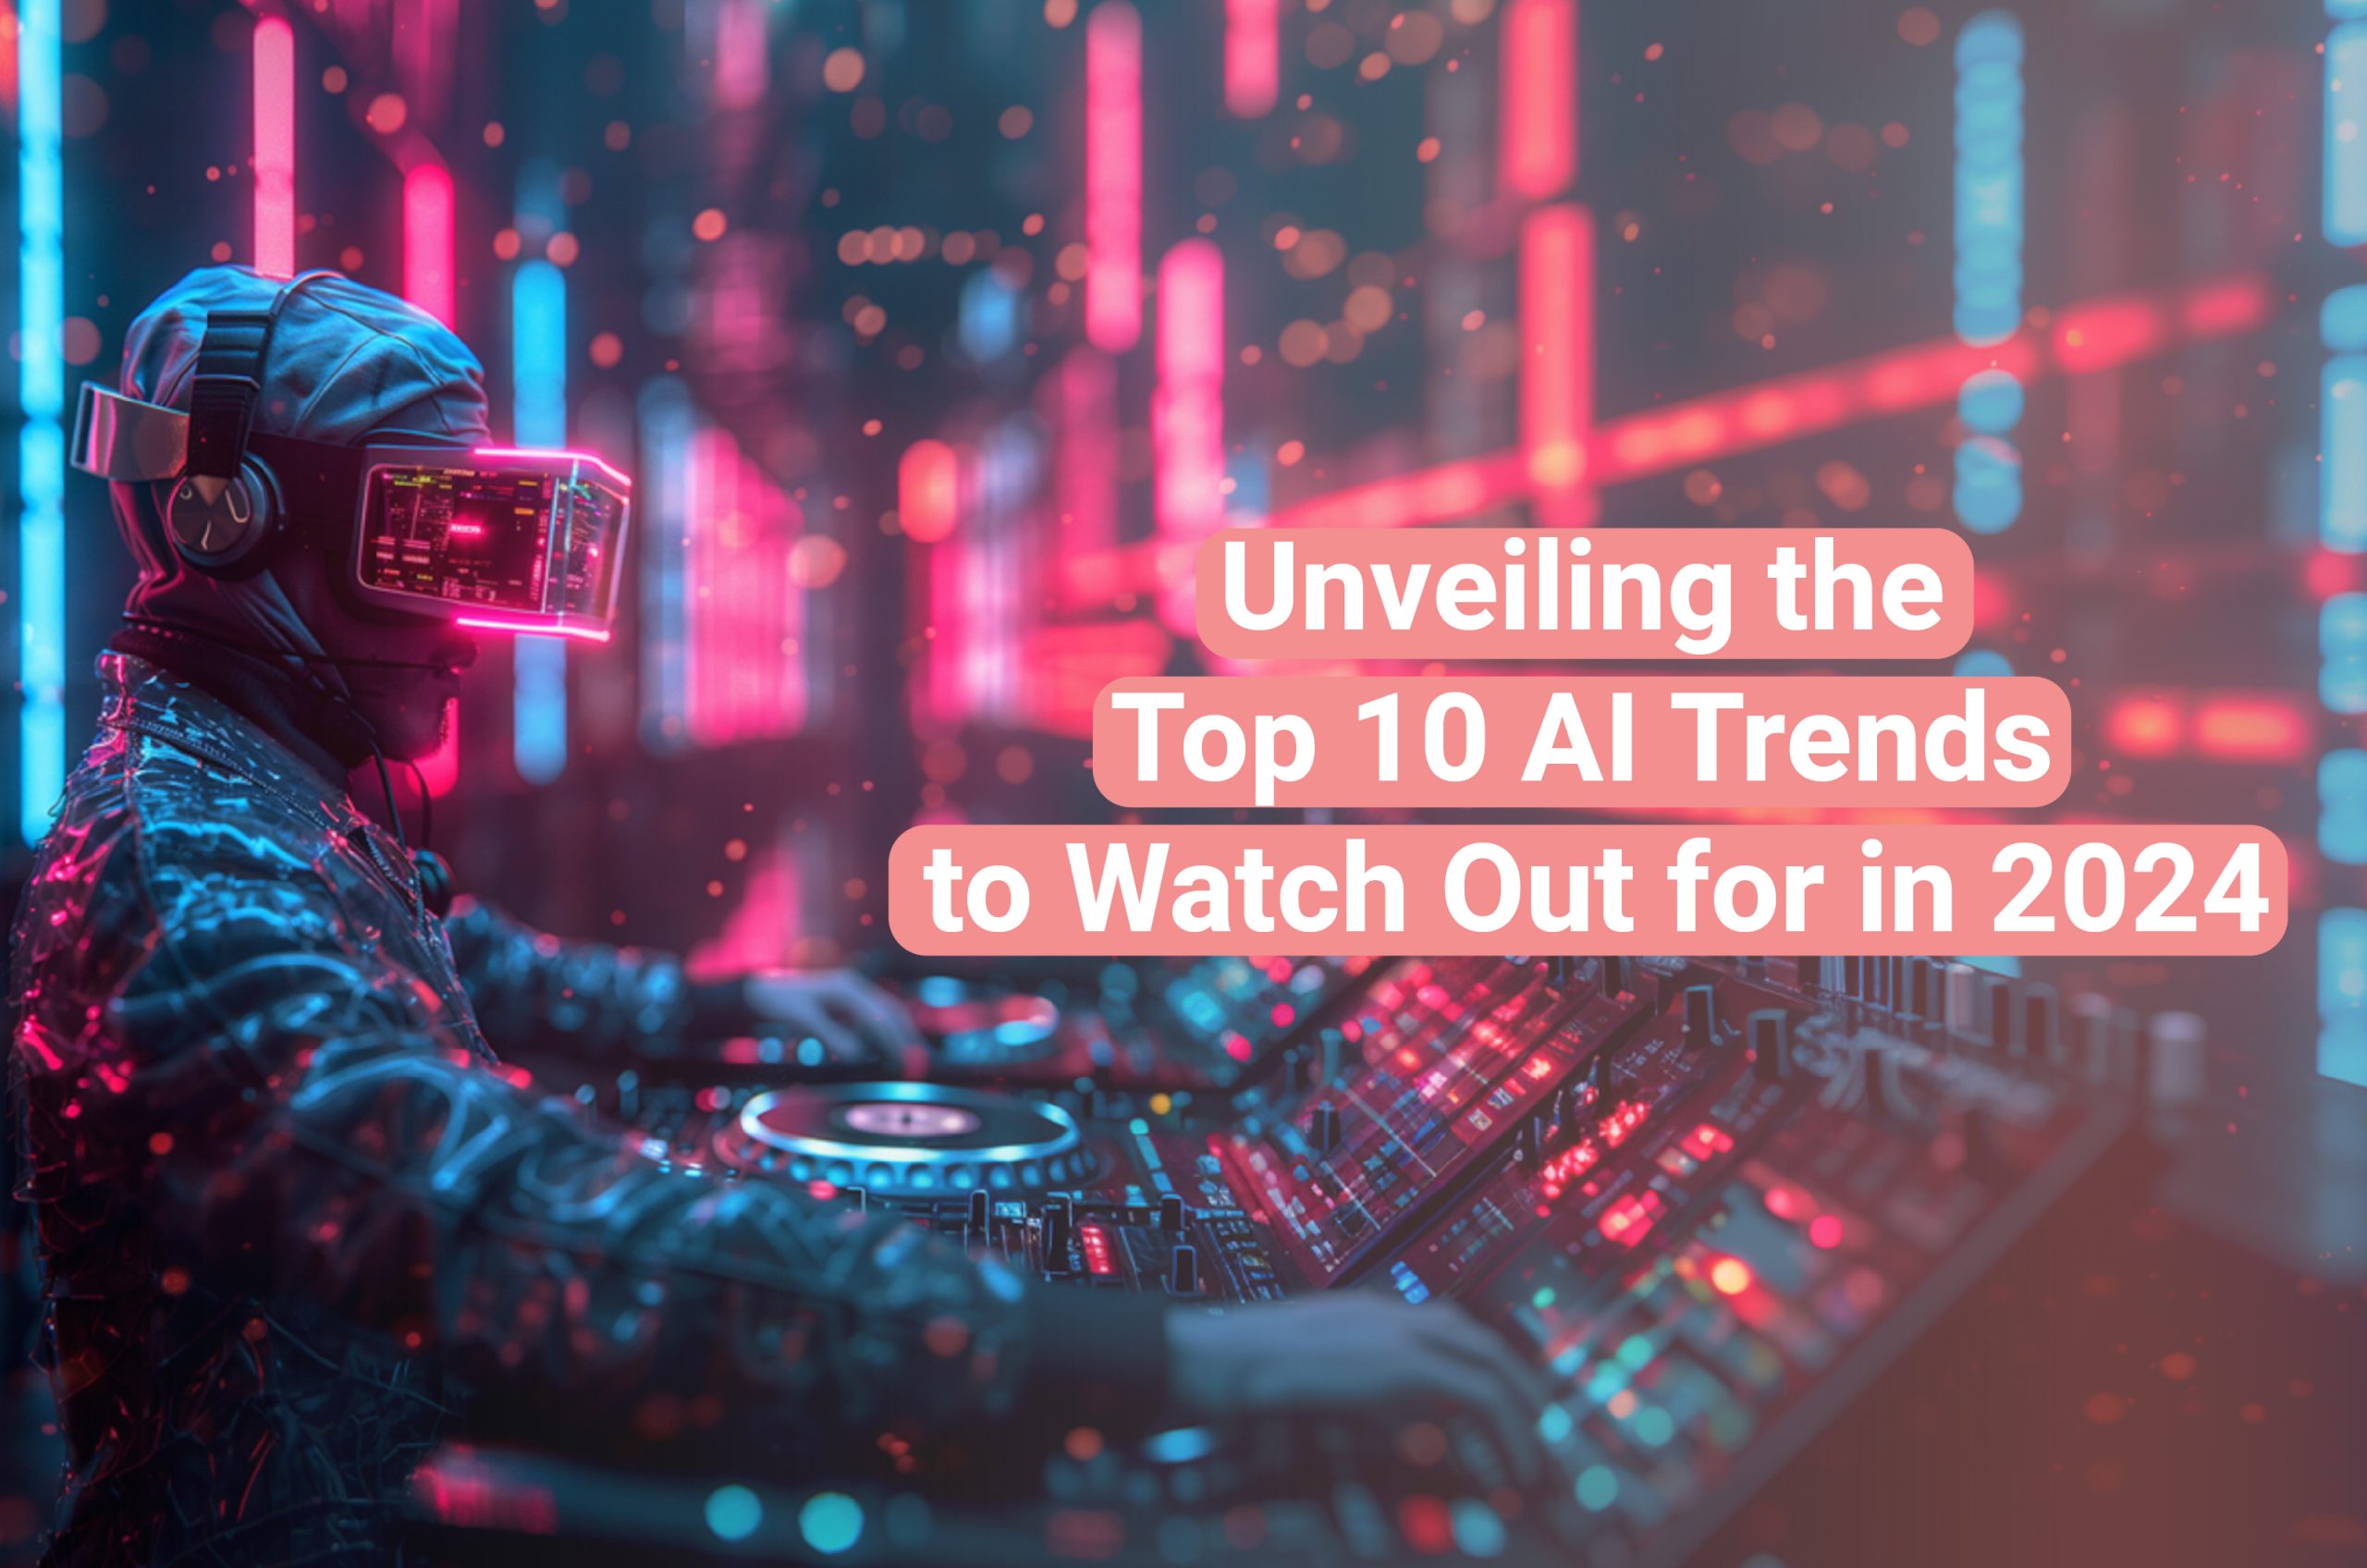 Unveiling the Top 10 AI Trends to Watch Out for in 2024